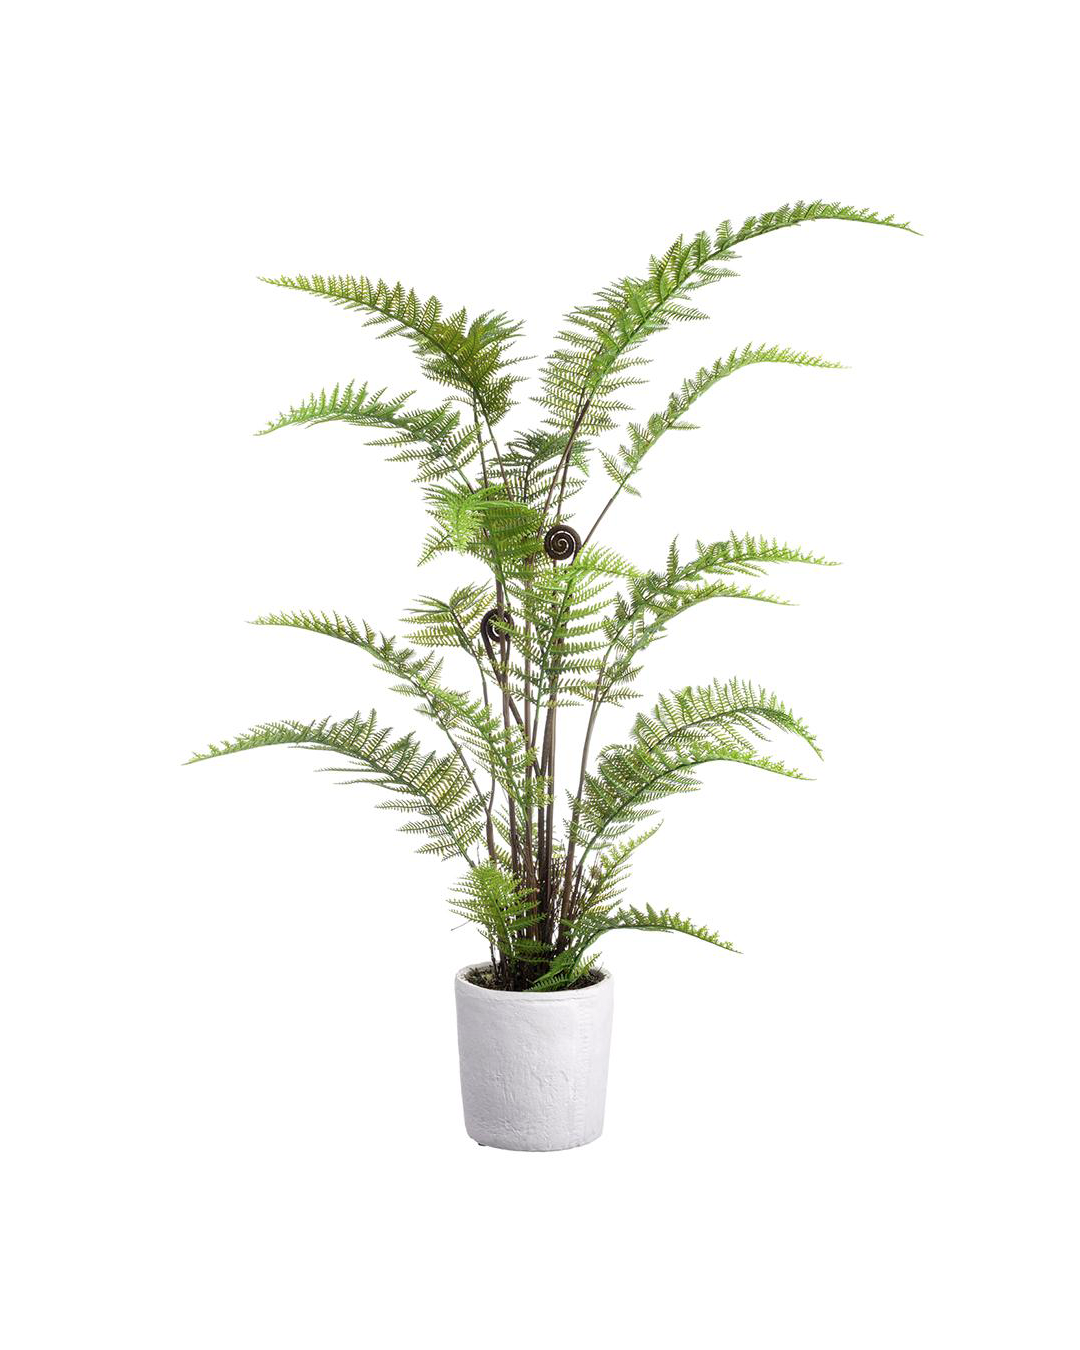 A 38&quot; Leather Fern Plant in a simple white pot, isolated on a white background at a Scottsdale, Arizona bungalow. The plant displays numerous vibrant fronds spreading upwards by AllState Floral And Craft.